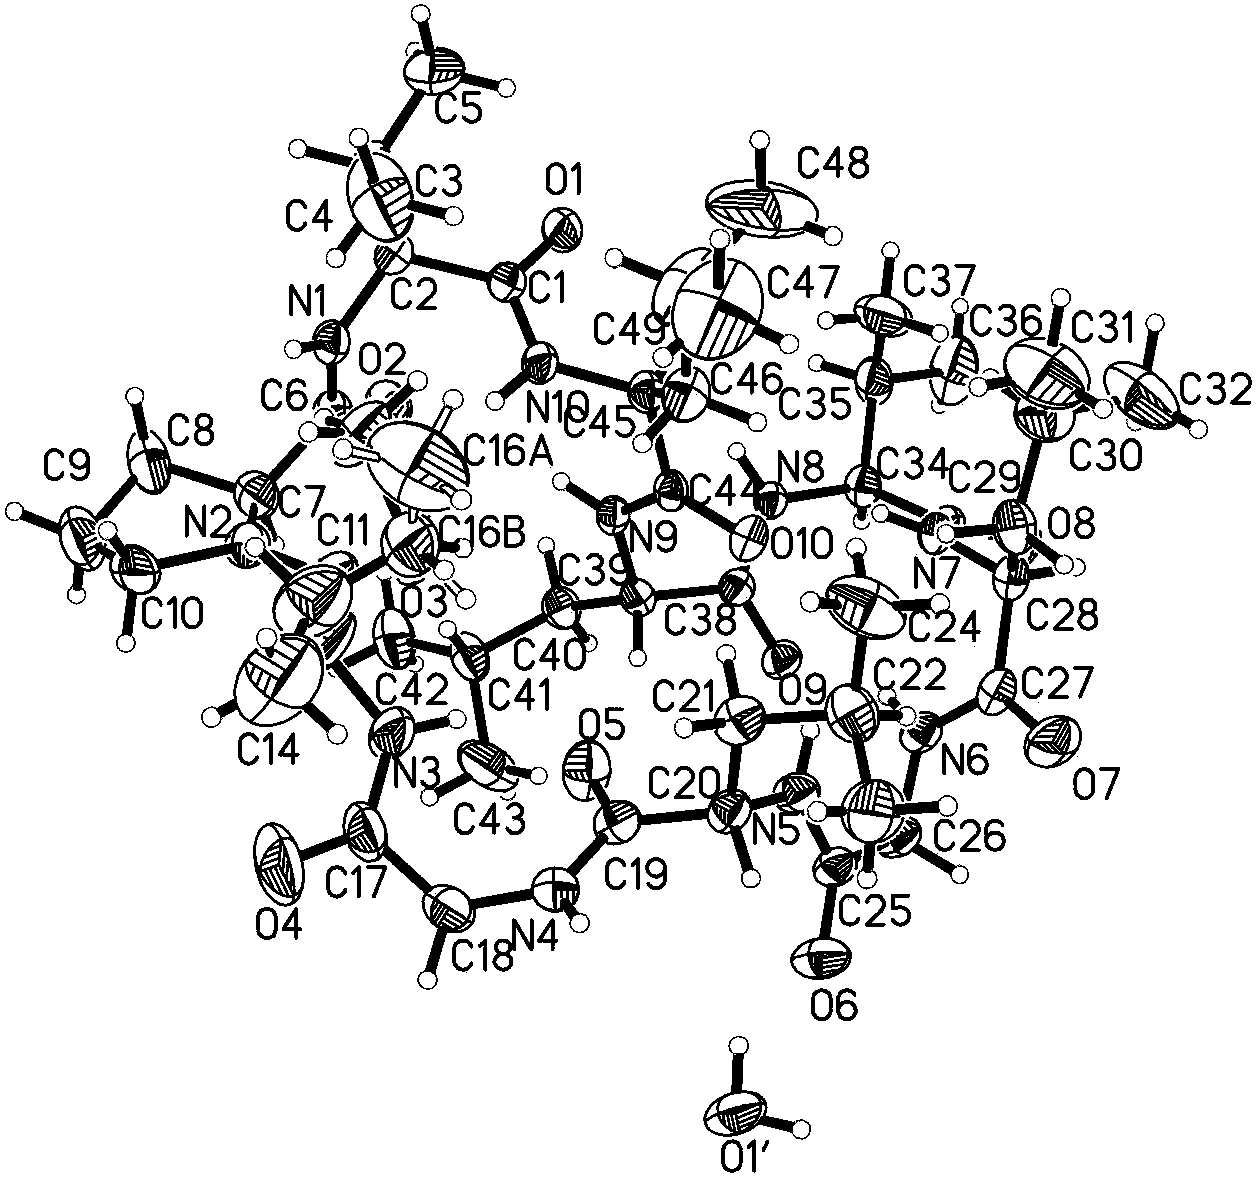 Chemical preparation method of cyclic decapeptide compound GG-110824